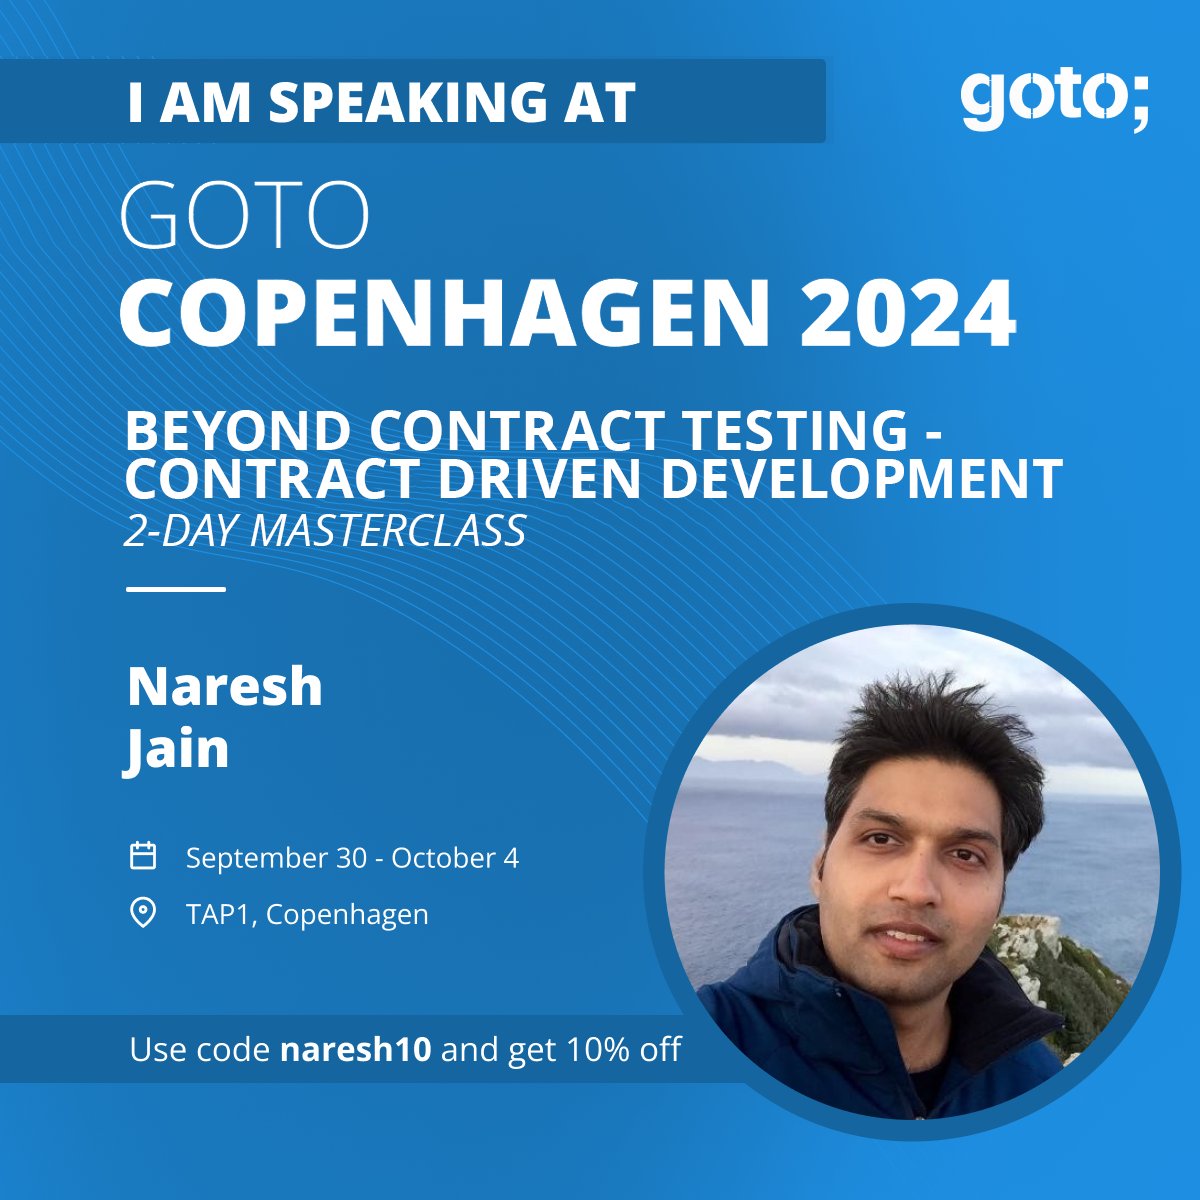 Join me at @GOTOcon from Sep 30-Oct 1 for a masterclass on #ContractDrivenDevelopment using @specmatic. Turn your #OpenAPI specs into executable contracts for parallel development & quicker time to market! Register here: gotocph.com/2024/mastercla…
#GOTOcph #CDD #Microservices